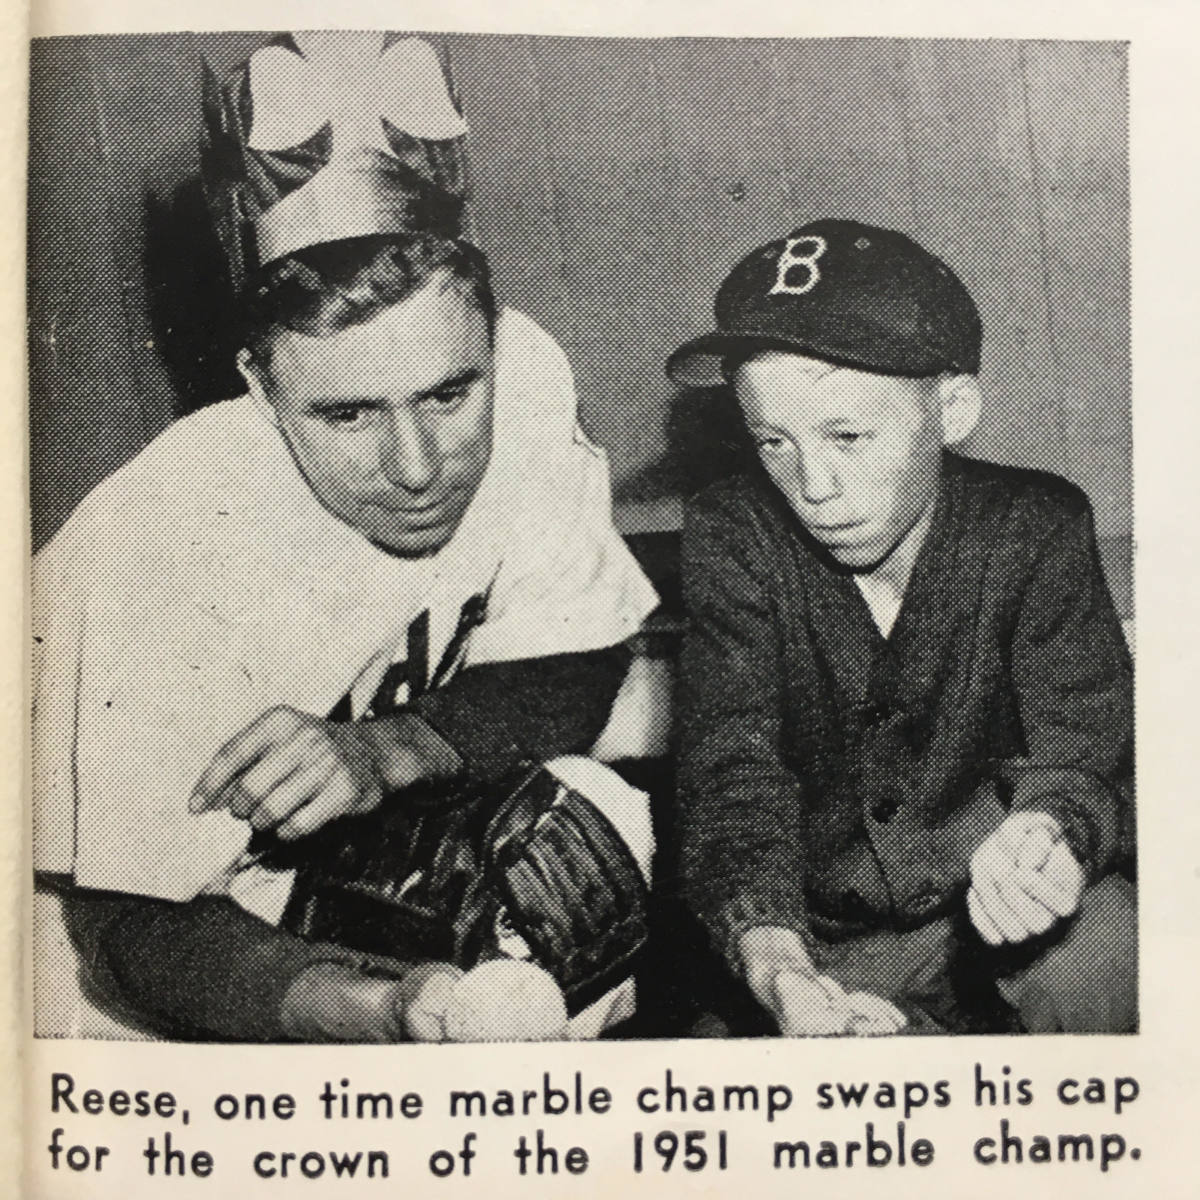 How popular Pee Wee Reese made it to the big leagues and became a two-sport  star - Sports Collectors Digest